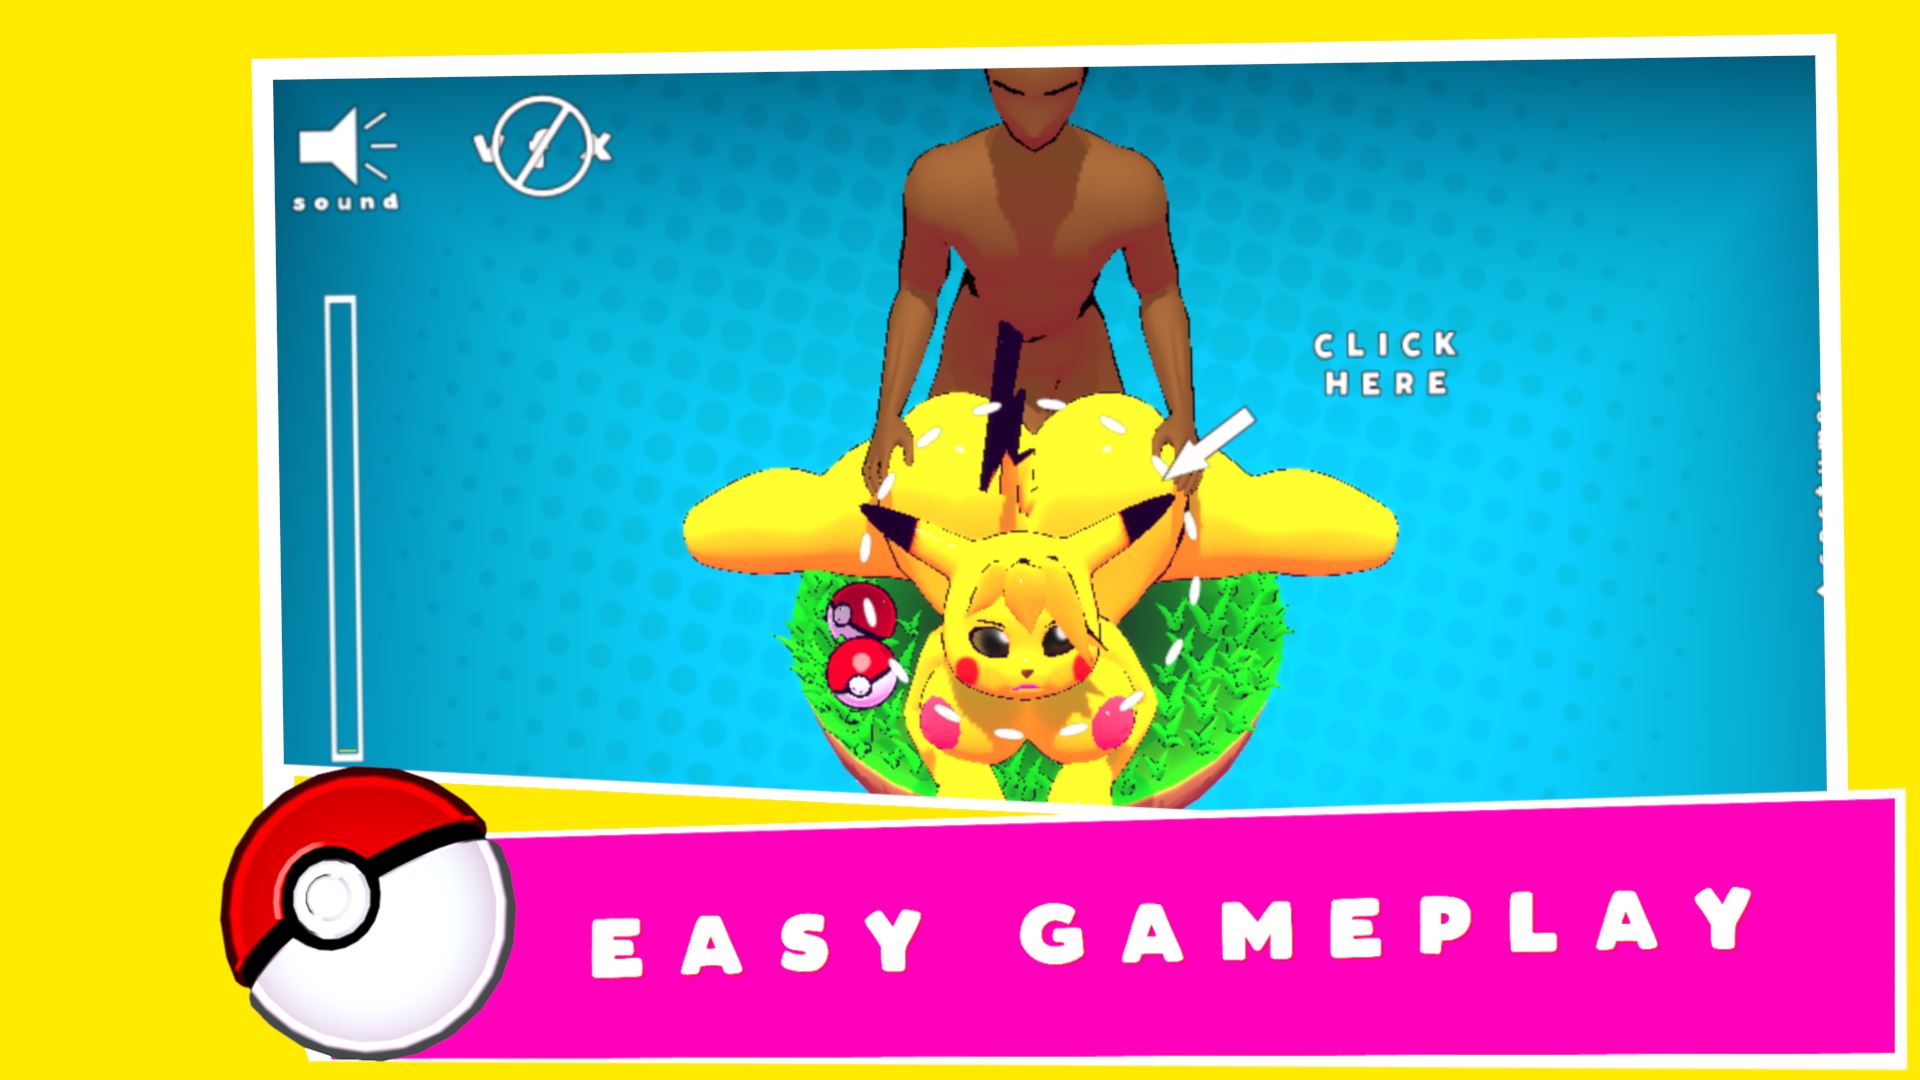 Others] Pretty Thicc Pokemon Parody - vFinal 18+ Adult xxx Porn Game  Download